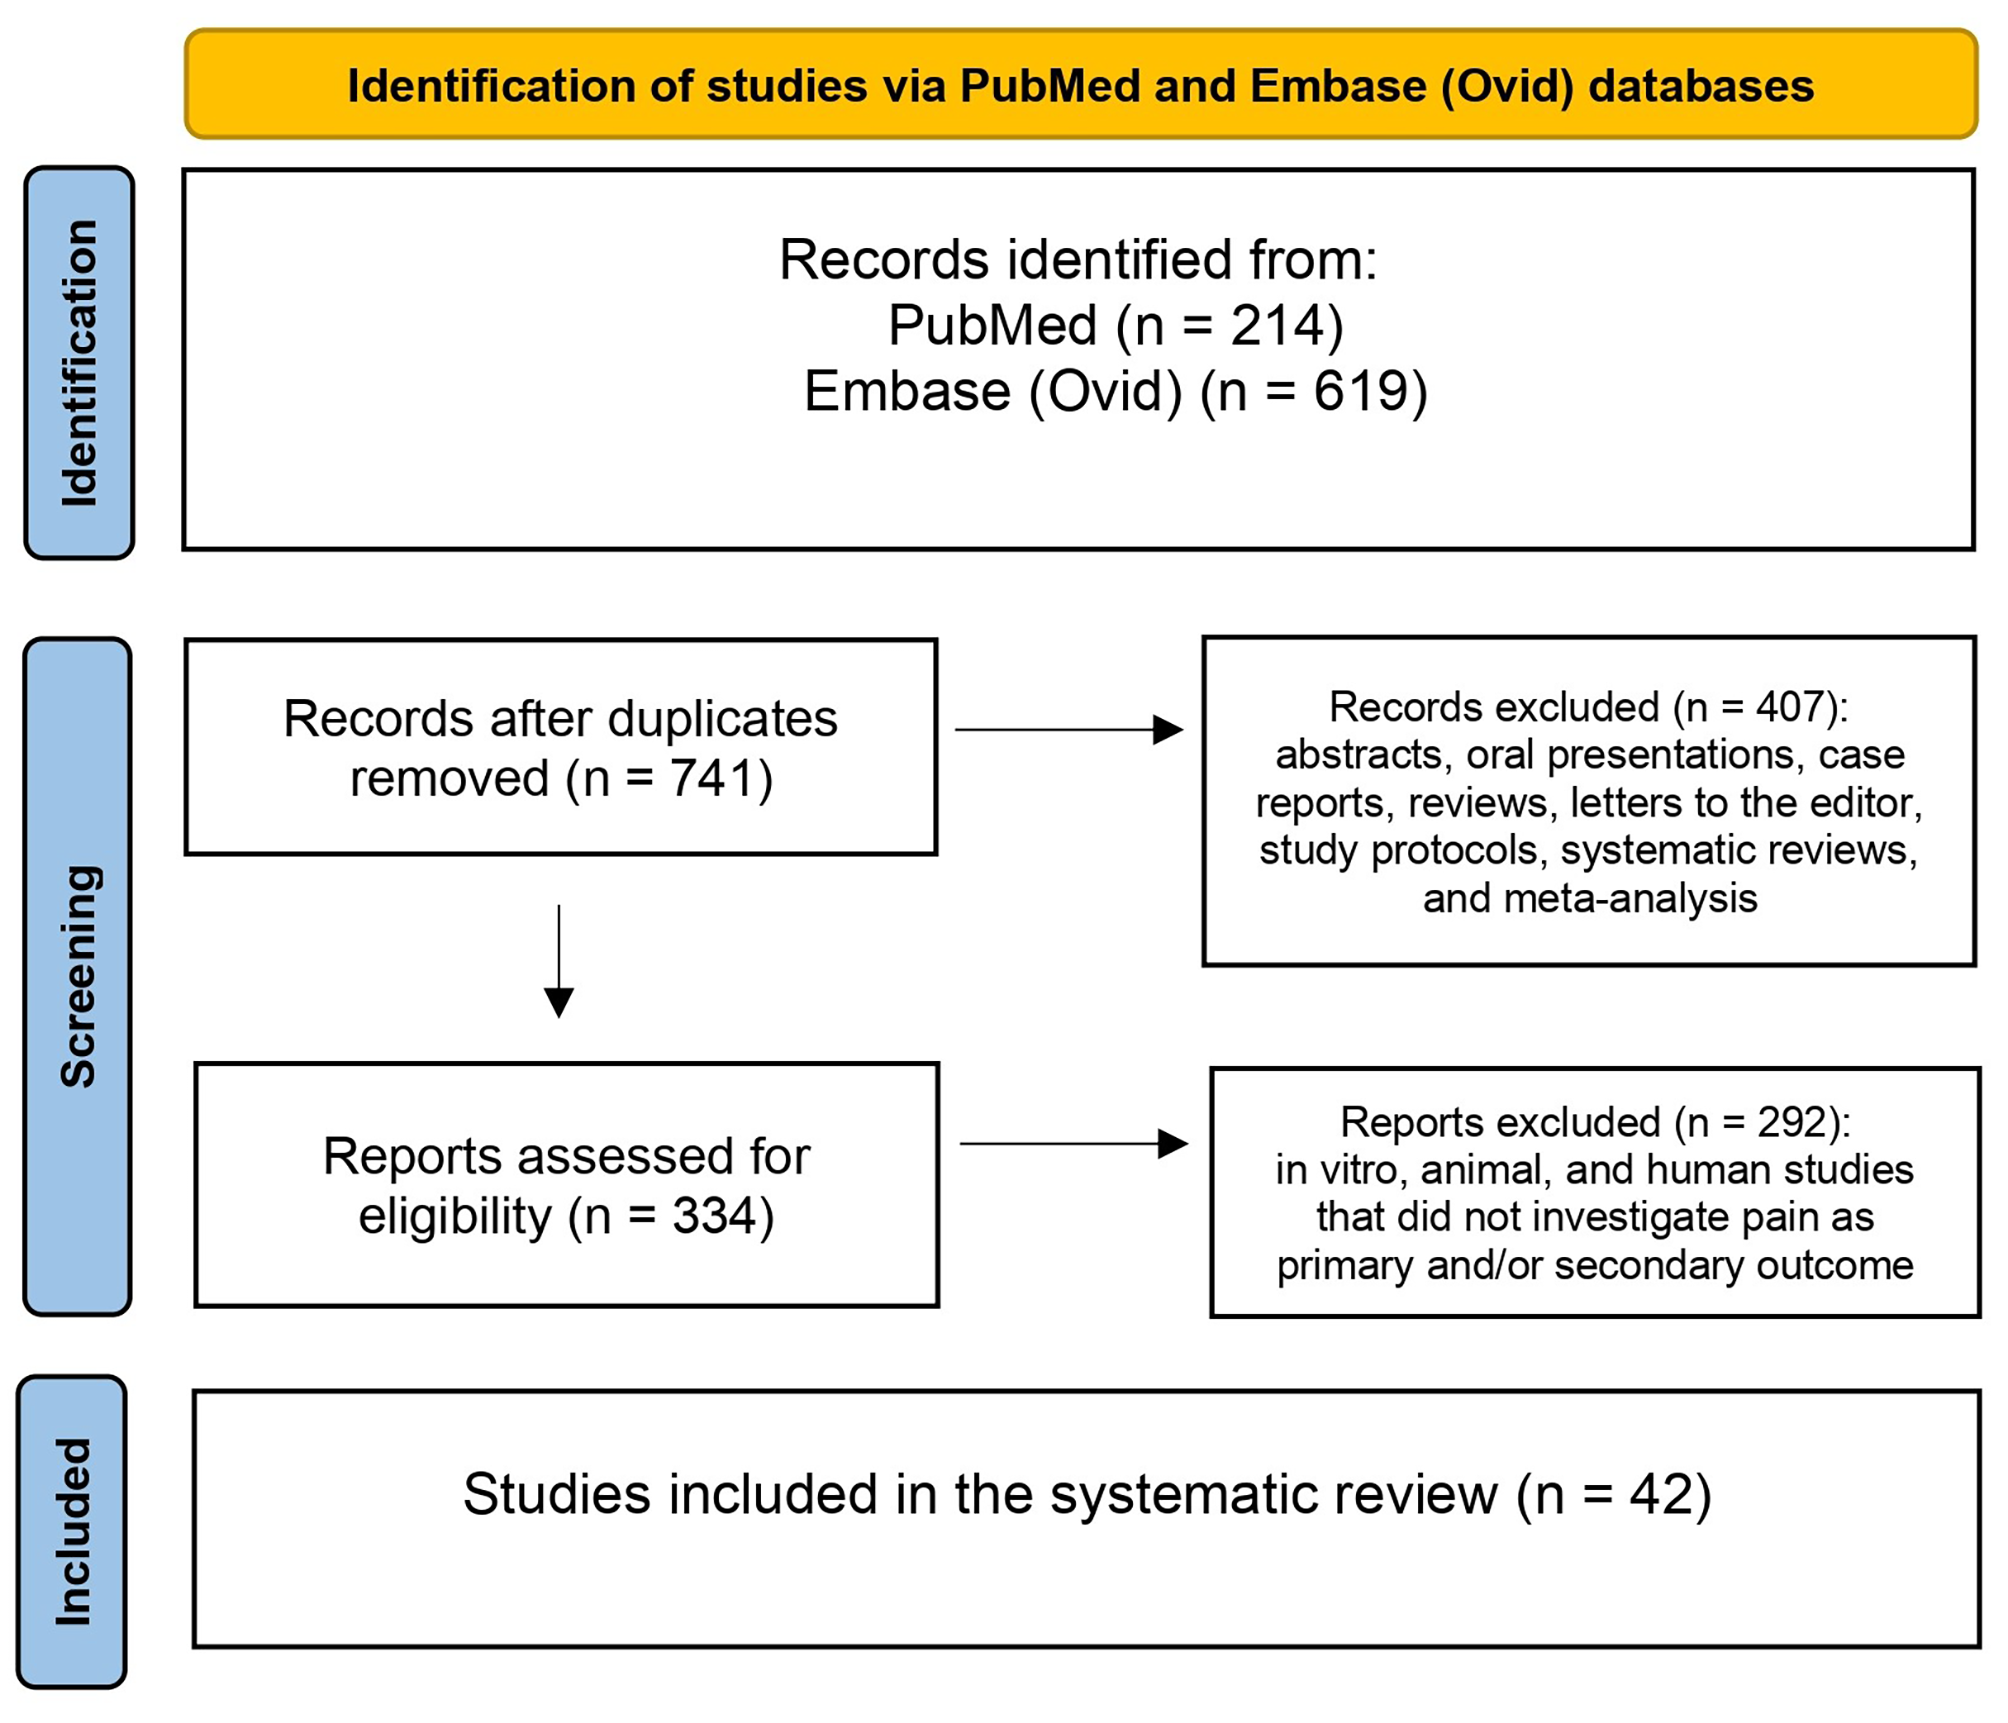 Glucagon-like peptide-1 (GLP-1) receptor agonists for headache and pain disorders: a systematic review